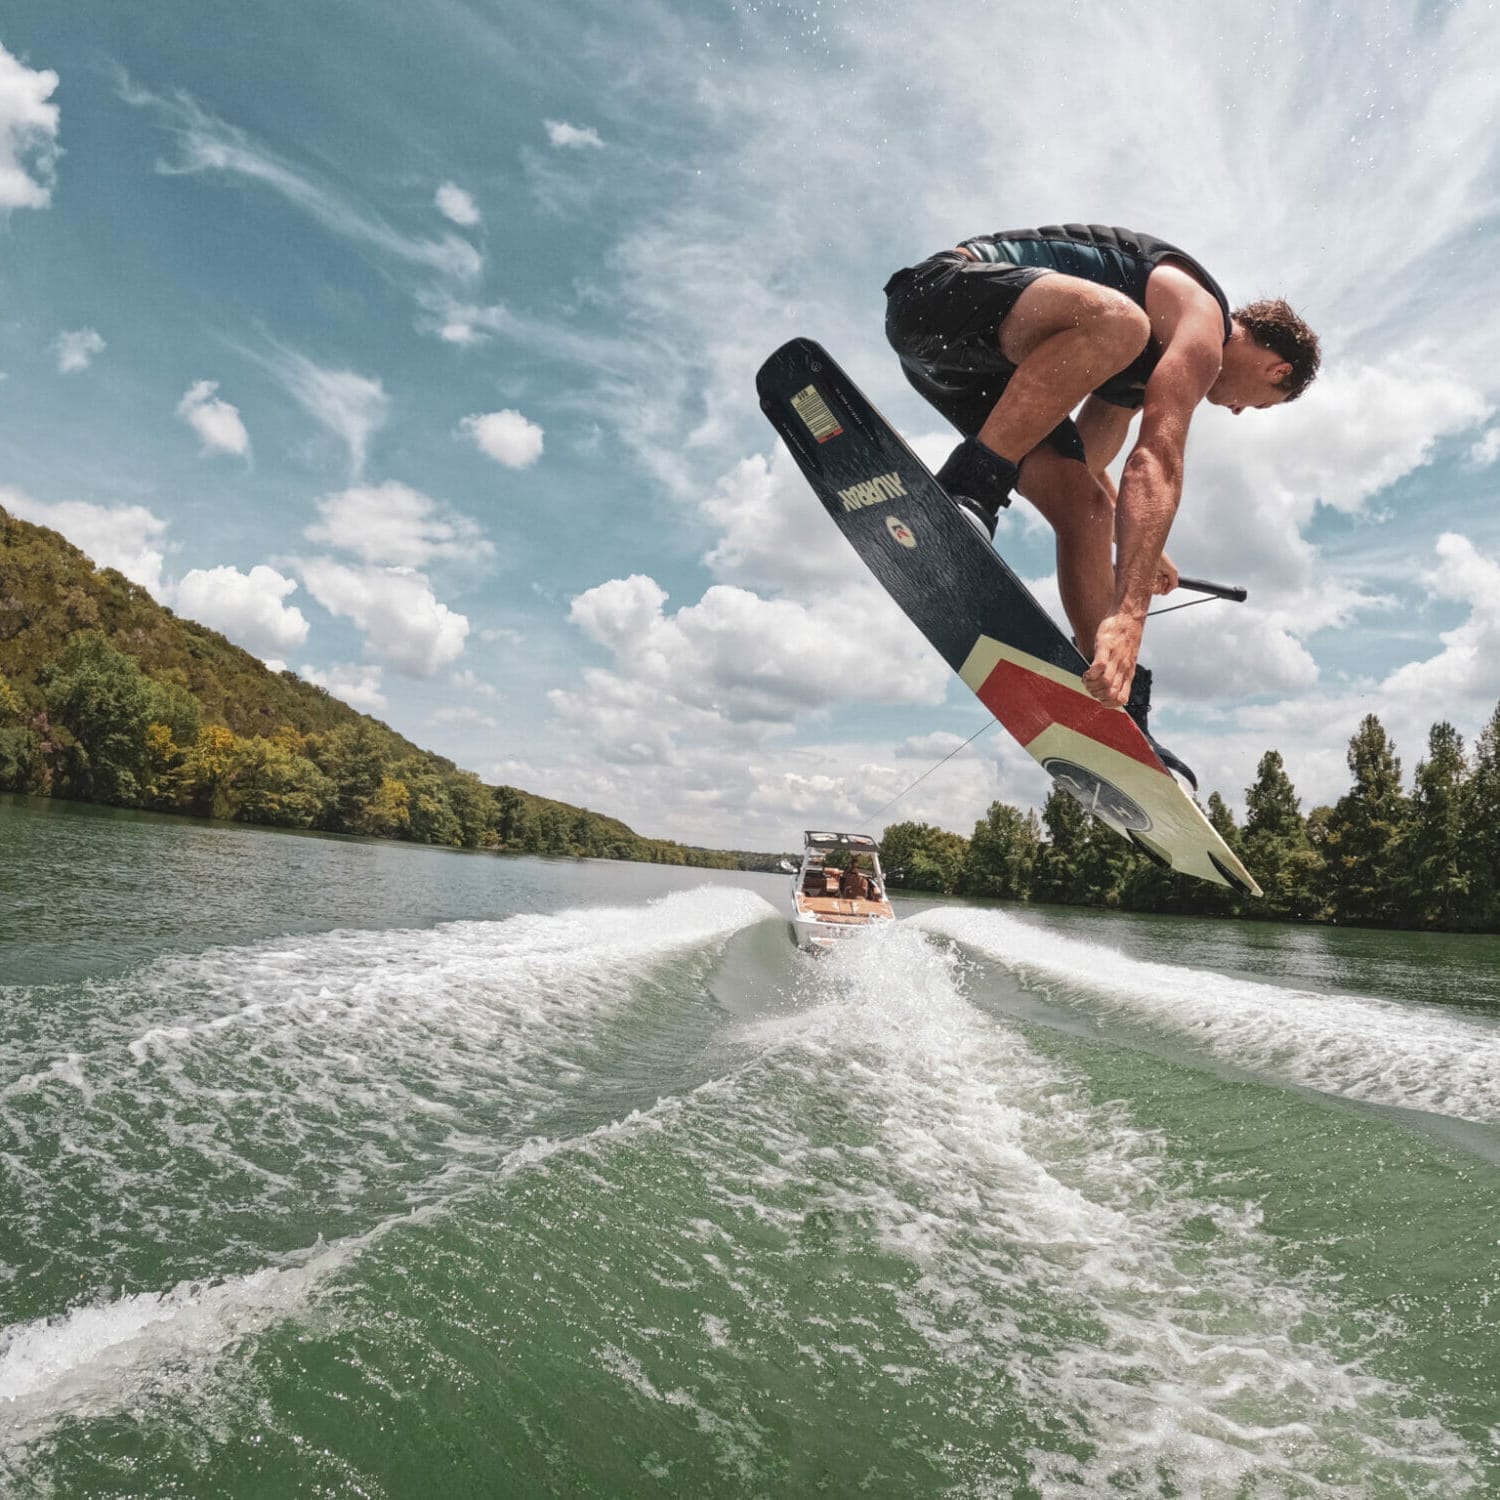 A man is riding a wakeboard behind a wakeboat on a lake.